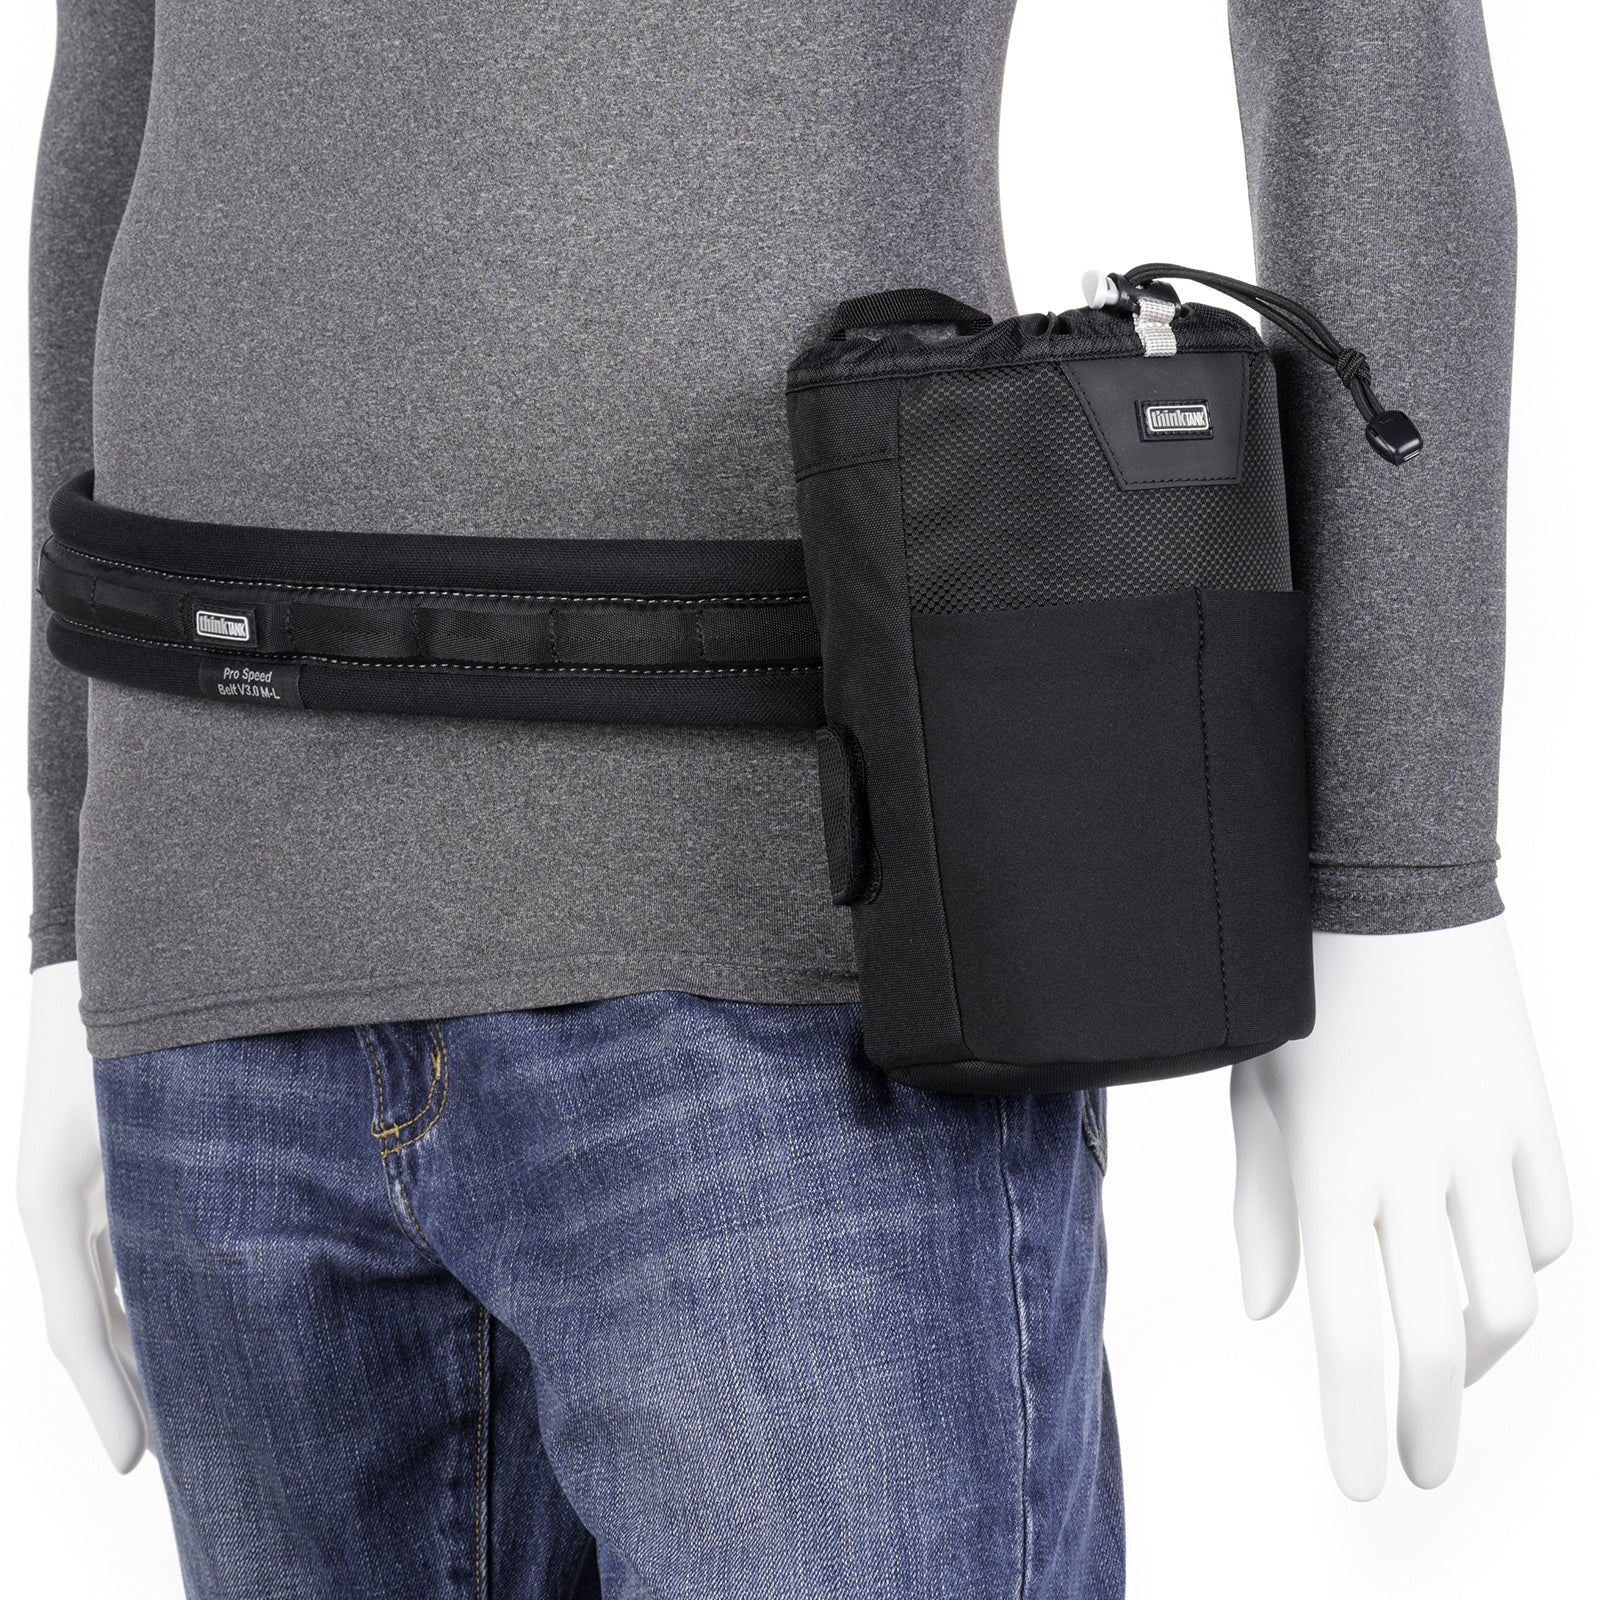 Attaches to any Think Tank belt or beltpack (sold separately)